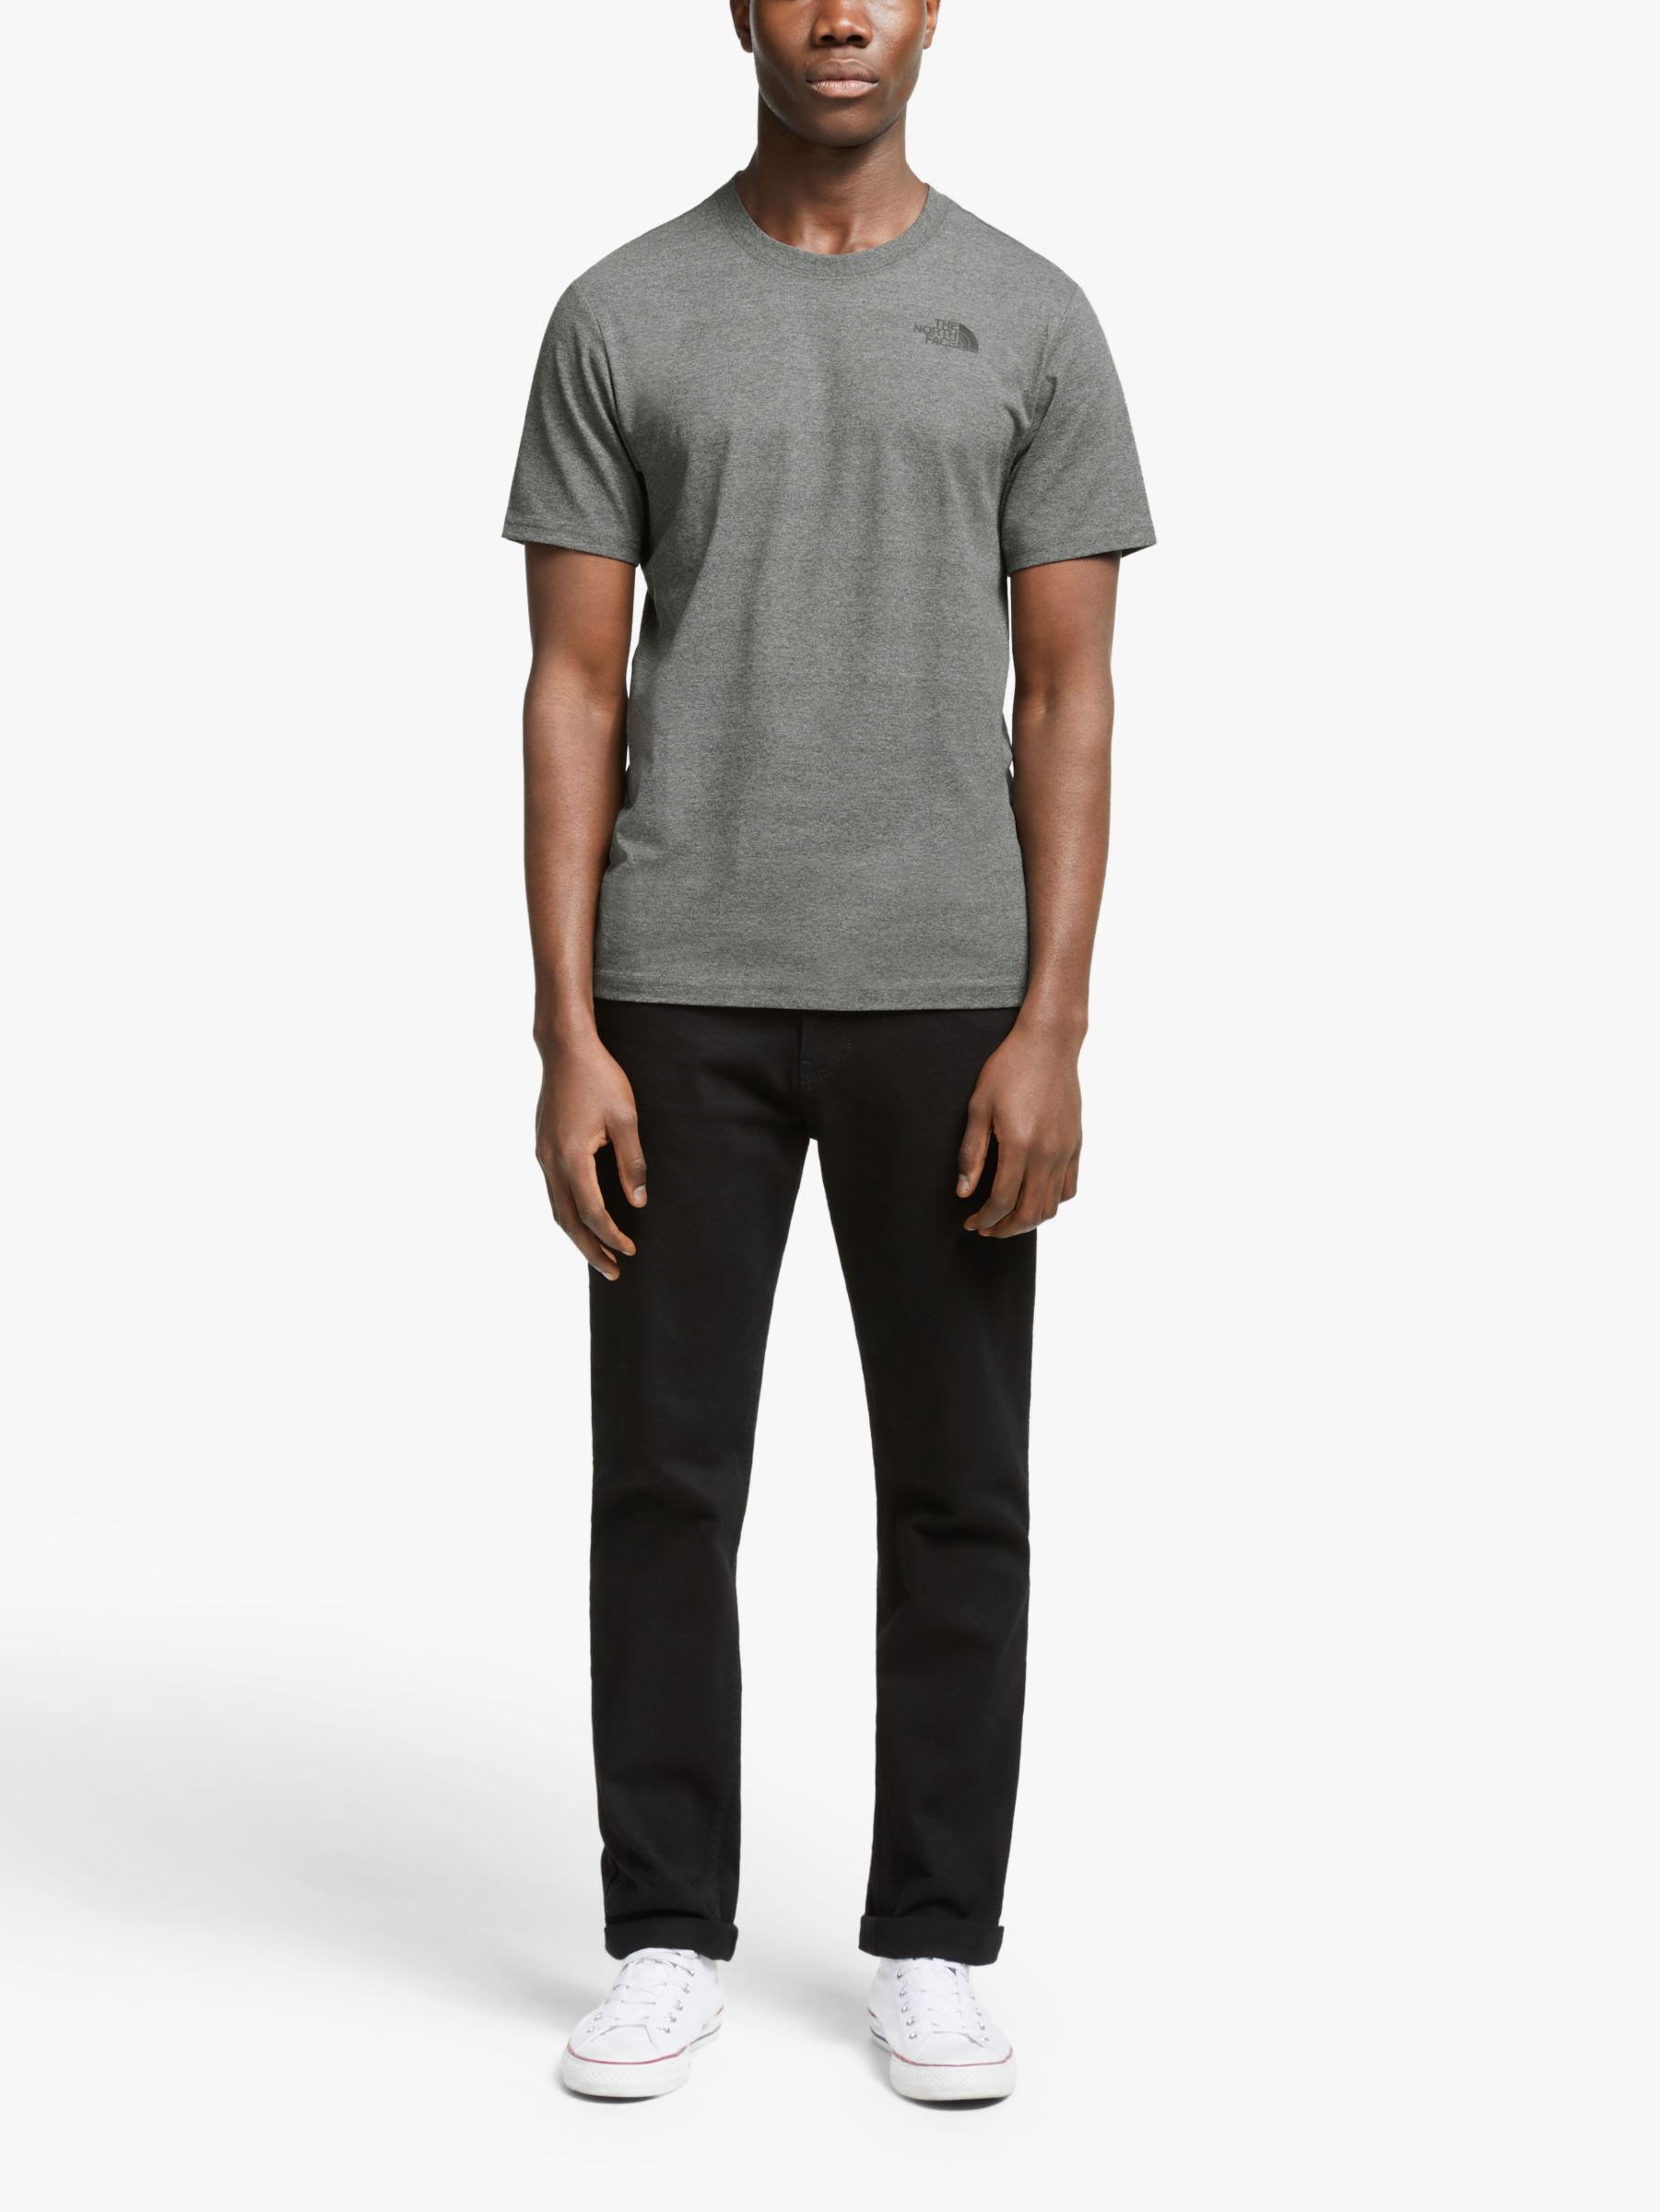 The North Face Cotton Red Box T Shirt At John Lewis Partners